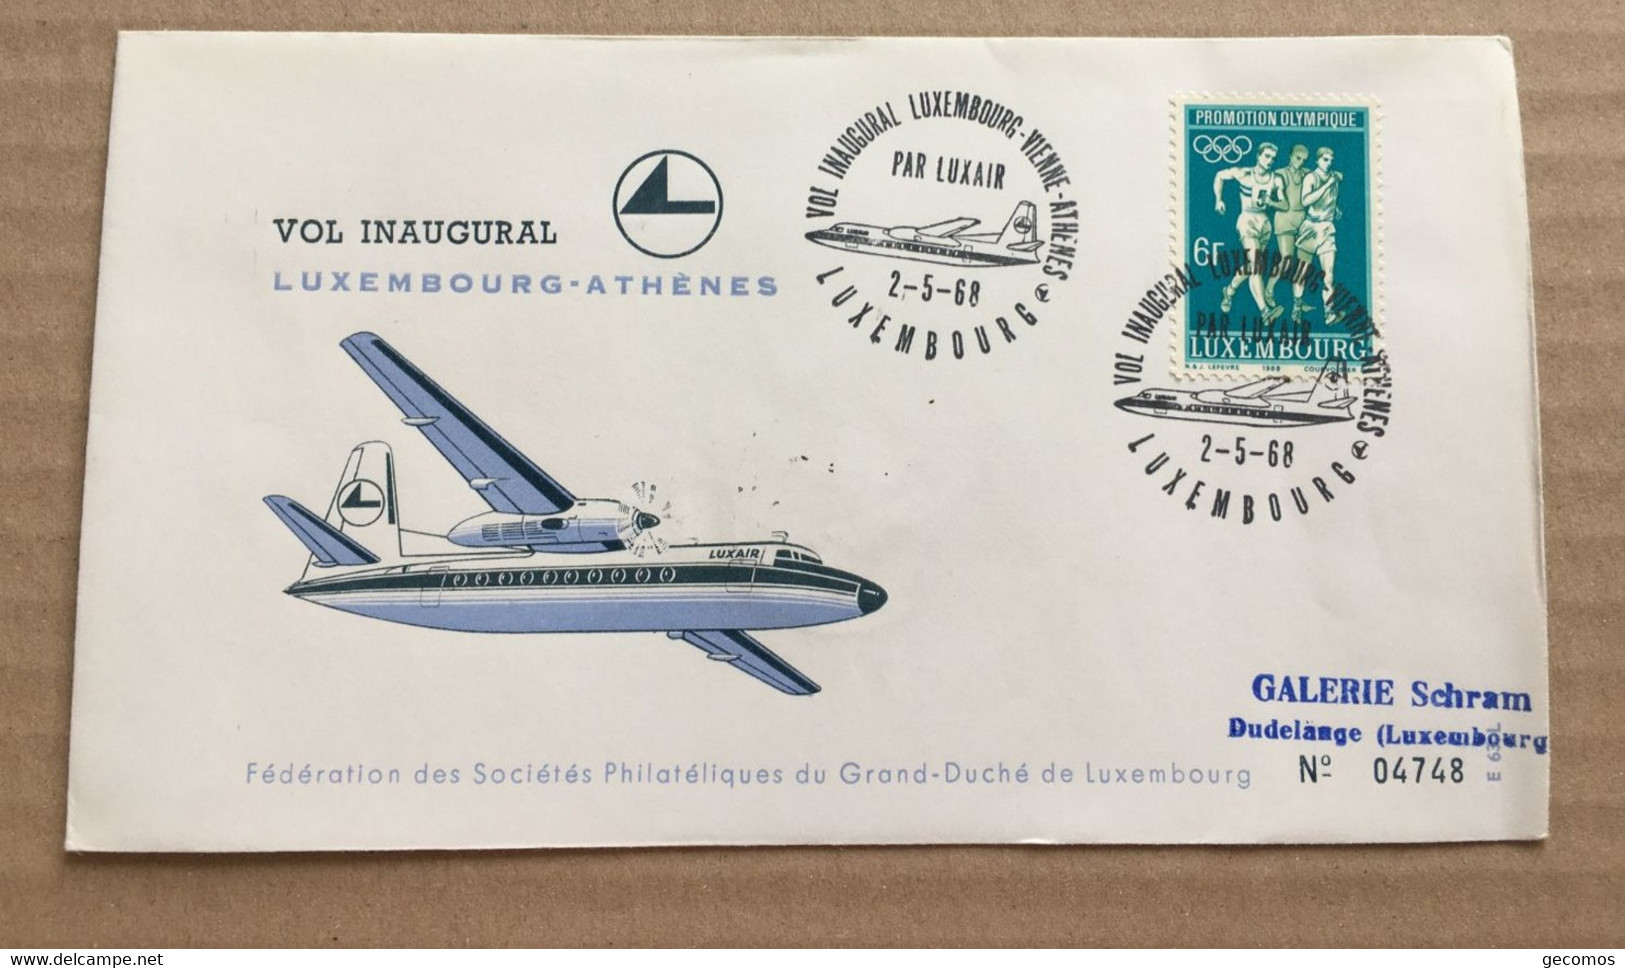 VOL INAUGURAL LUXEMBOURG-ATHENES 2-5-68 - (Avion LUXAIR) - Timbre Promotion Olympique LUXEMBOURG. - Covers & Documents